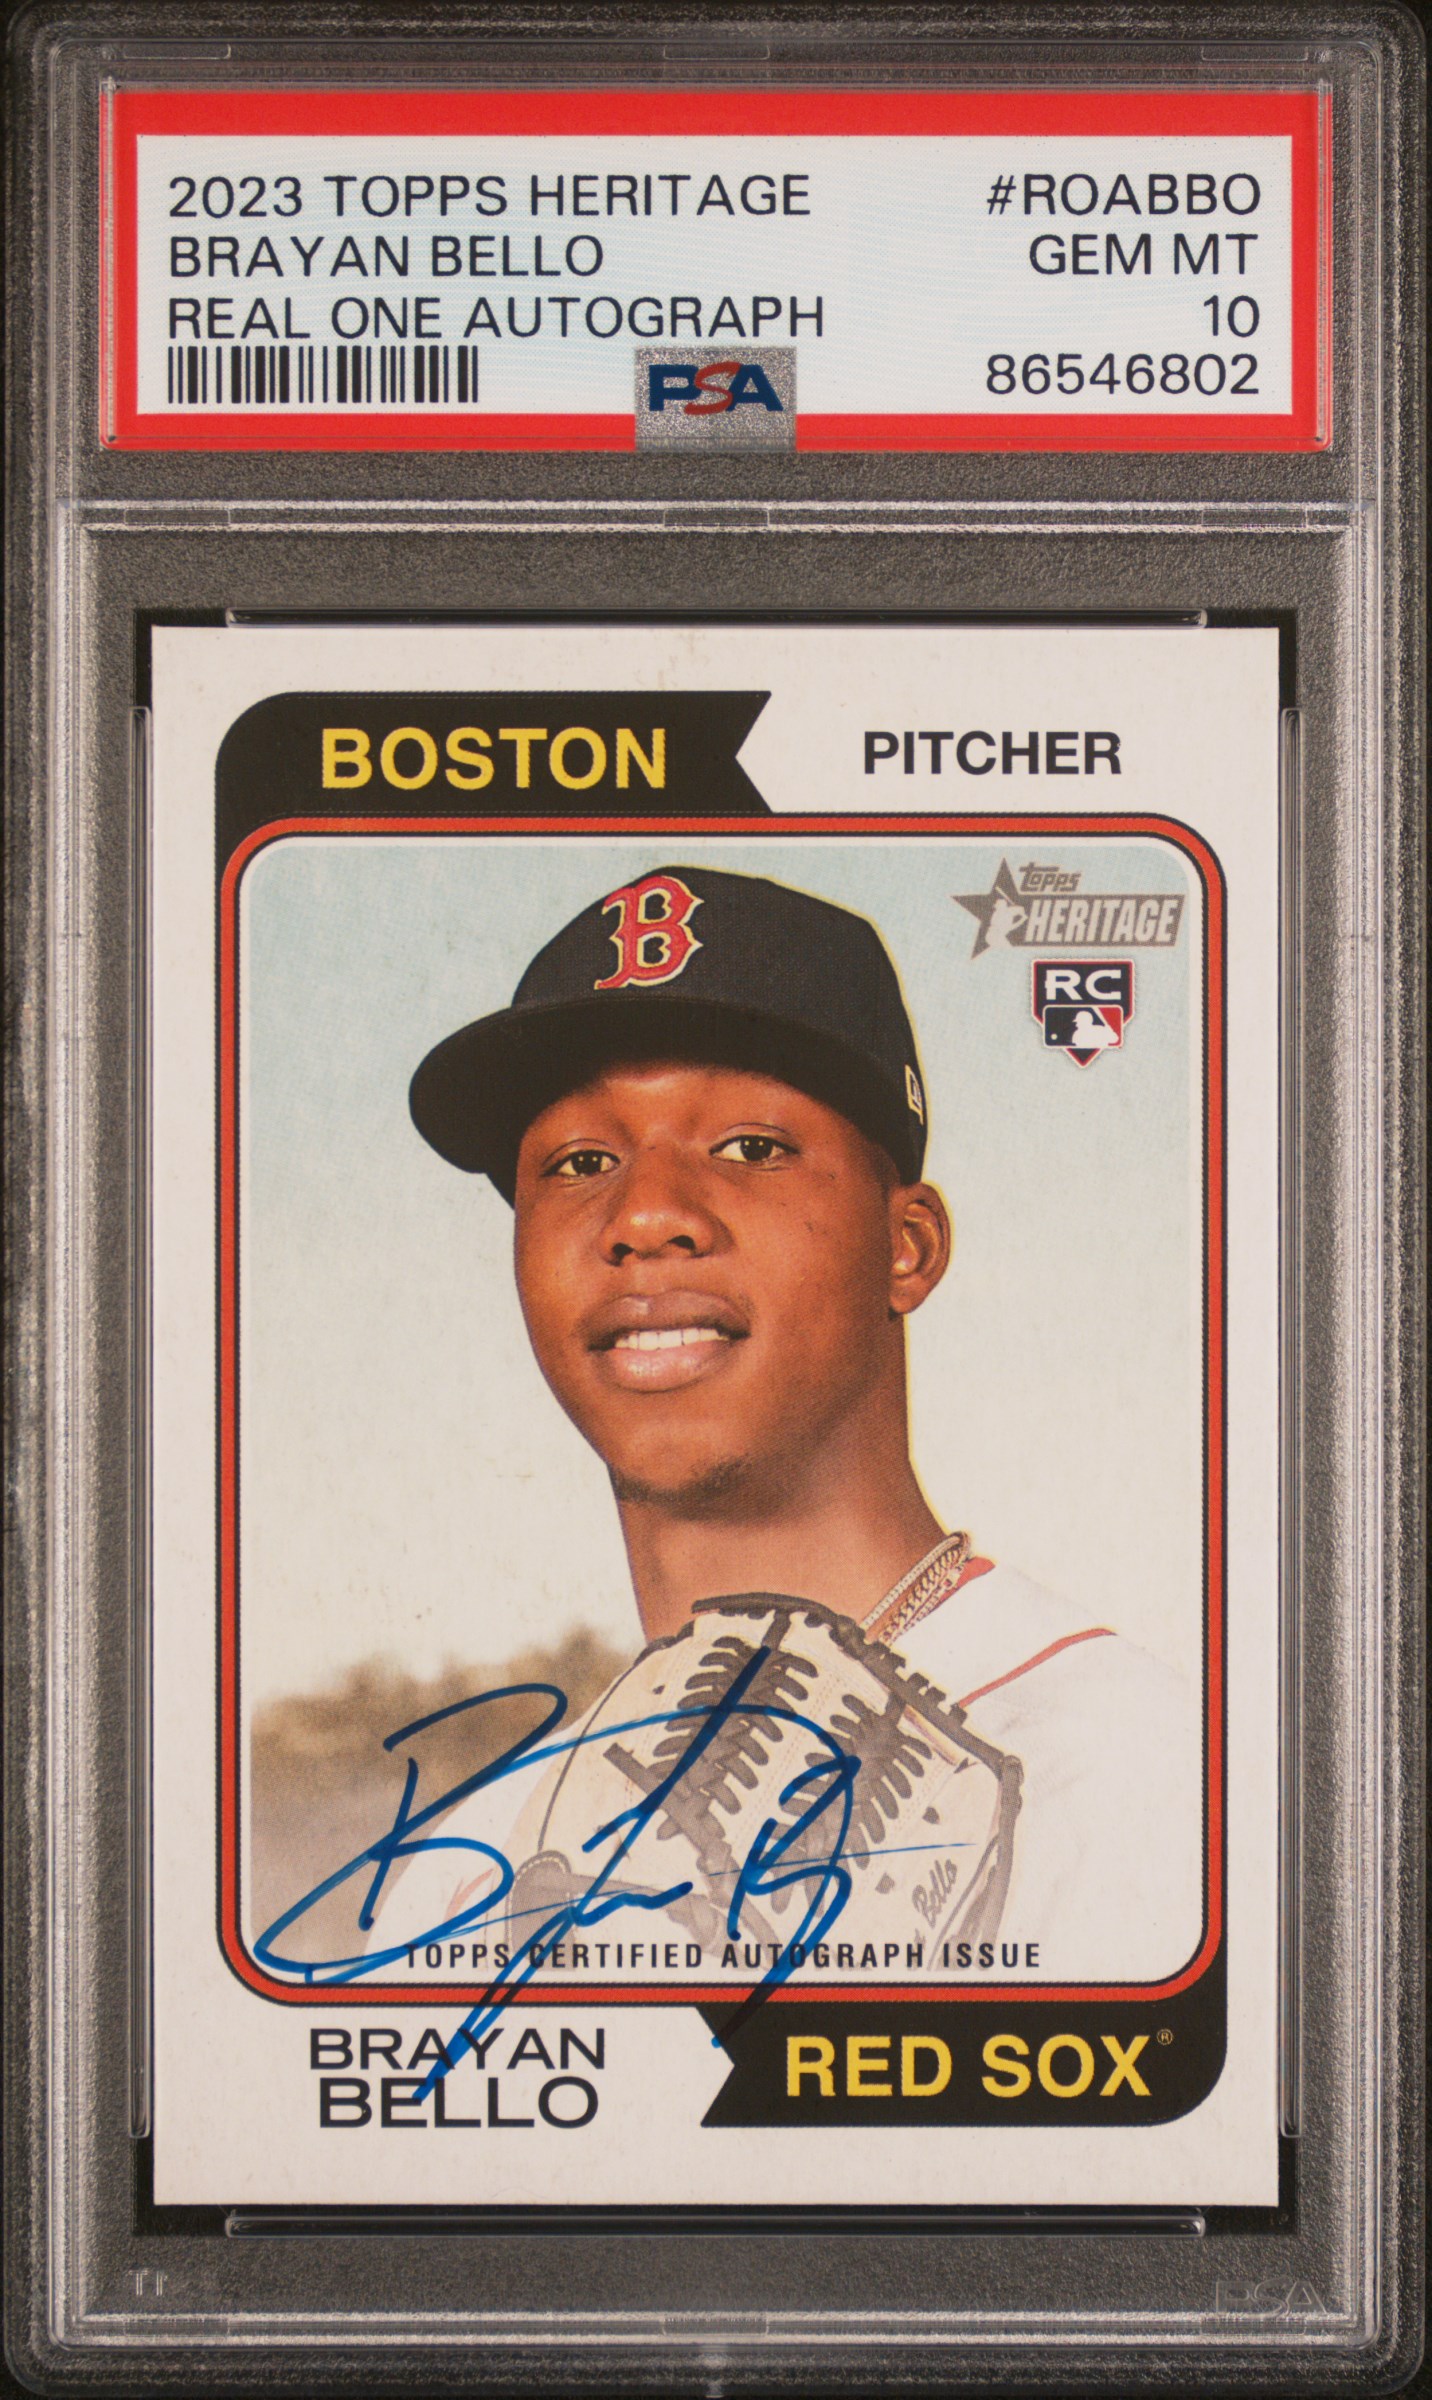 2023 Topps Heritage Real One Autographs #ROABBO Brayan Bello Signed Card Signed Rookie Card – PSA GEM MT 10